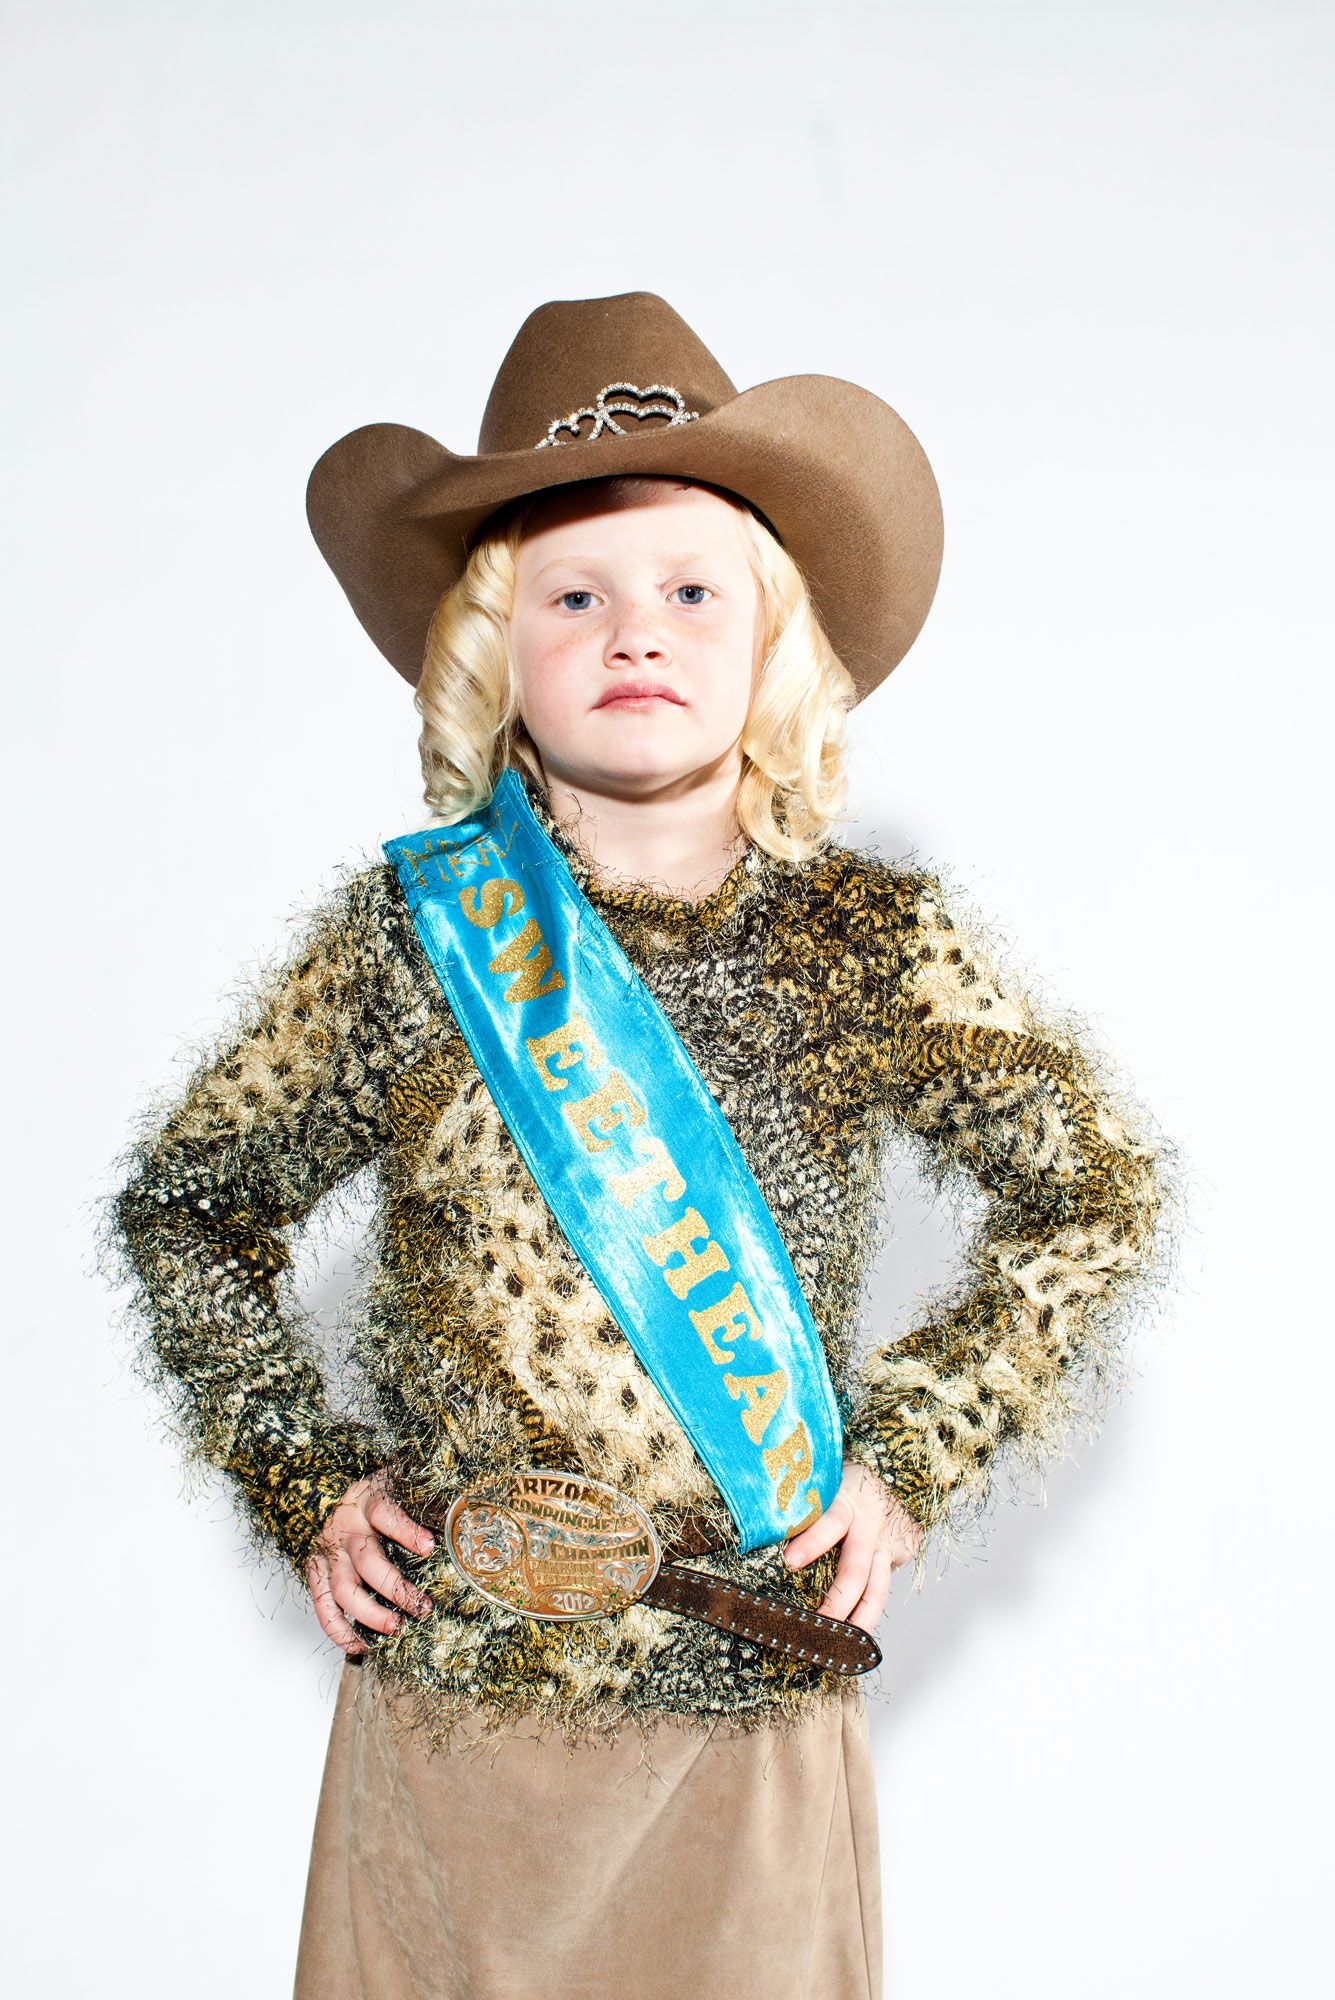 Princesses of Rodeo: Inside Arizona's Miss Sweetheart Pageant